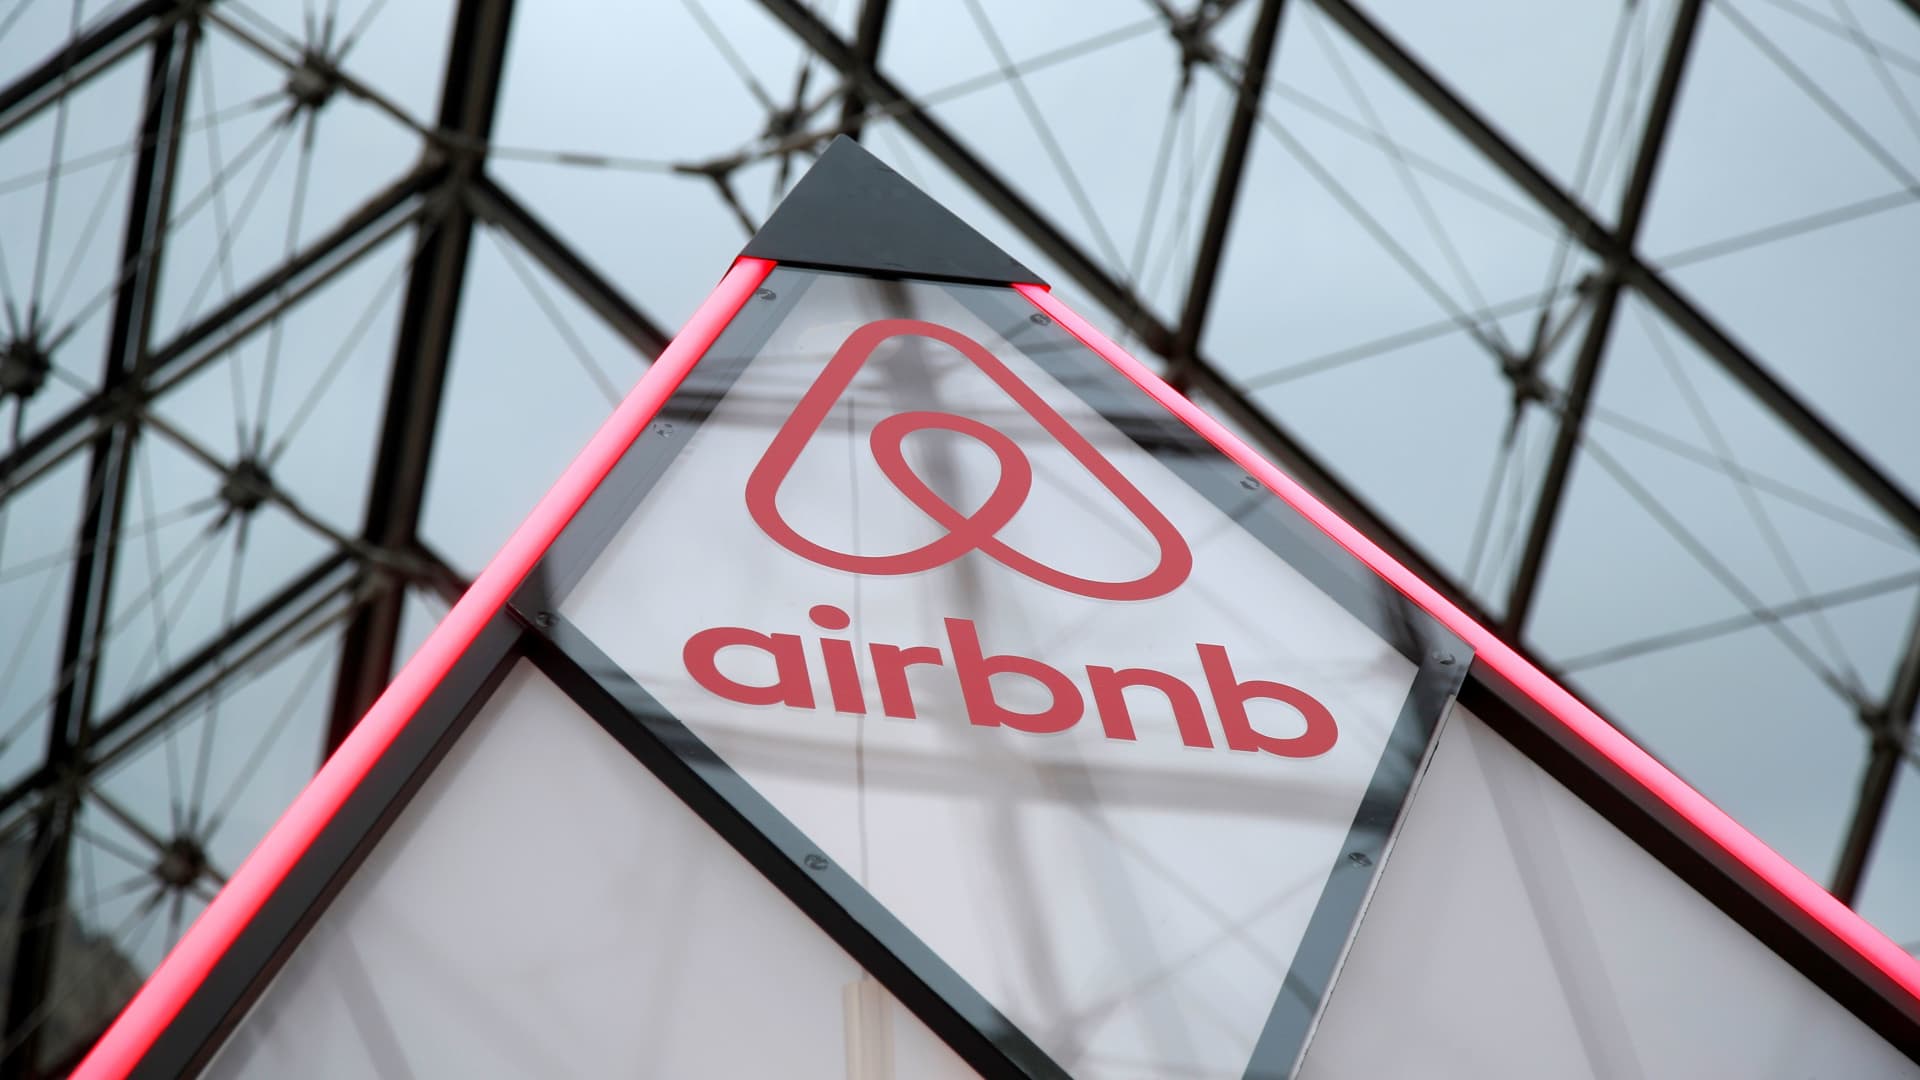 Top analysts say buy stocks like Airbnb & Pinterest